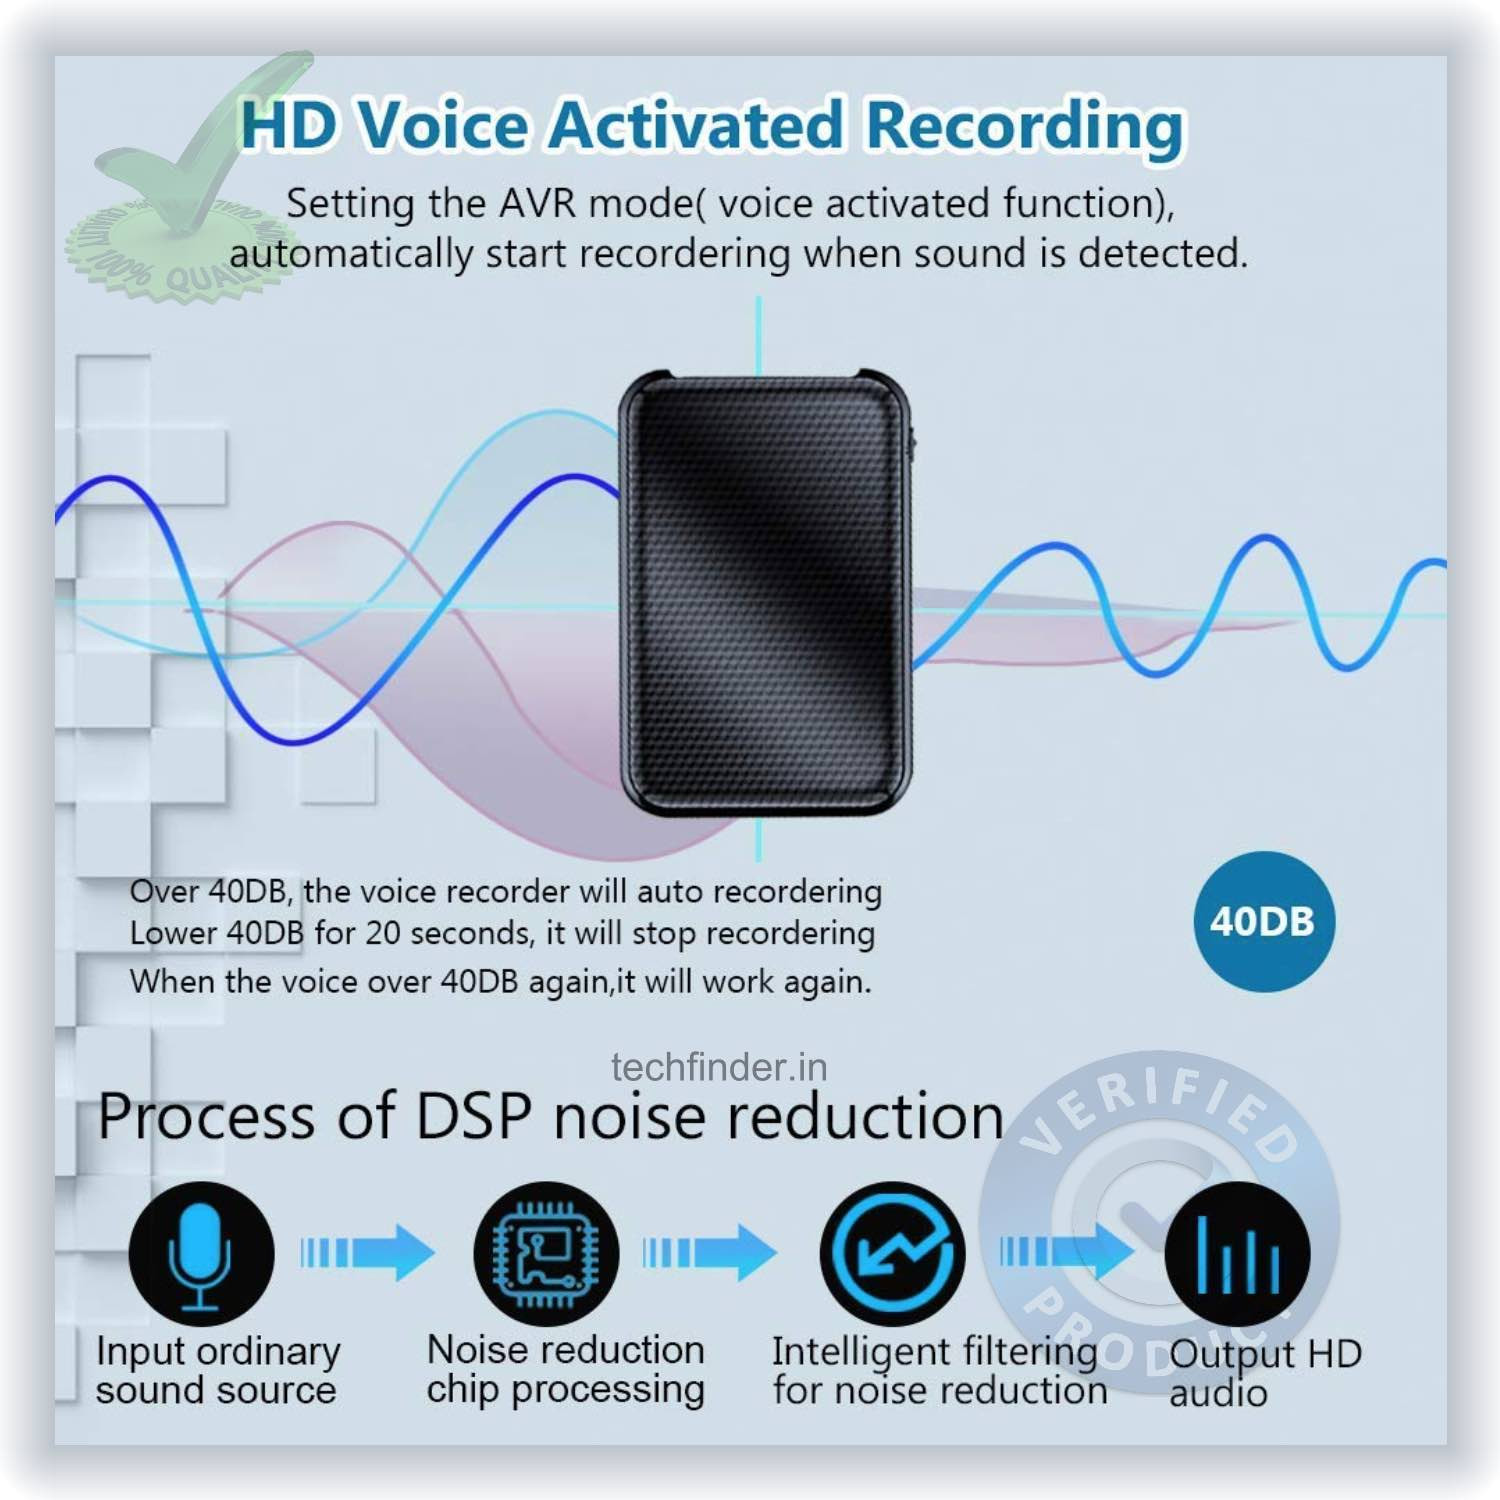 32GB Long Time Spy Hidden Voice Audio Song Recorder in Power Bank